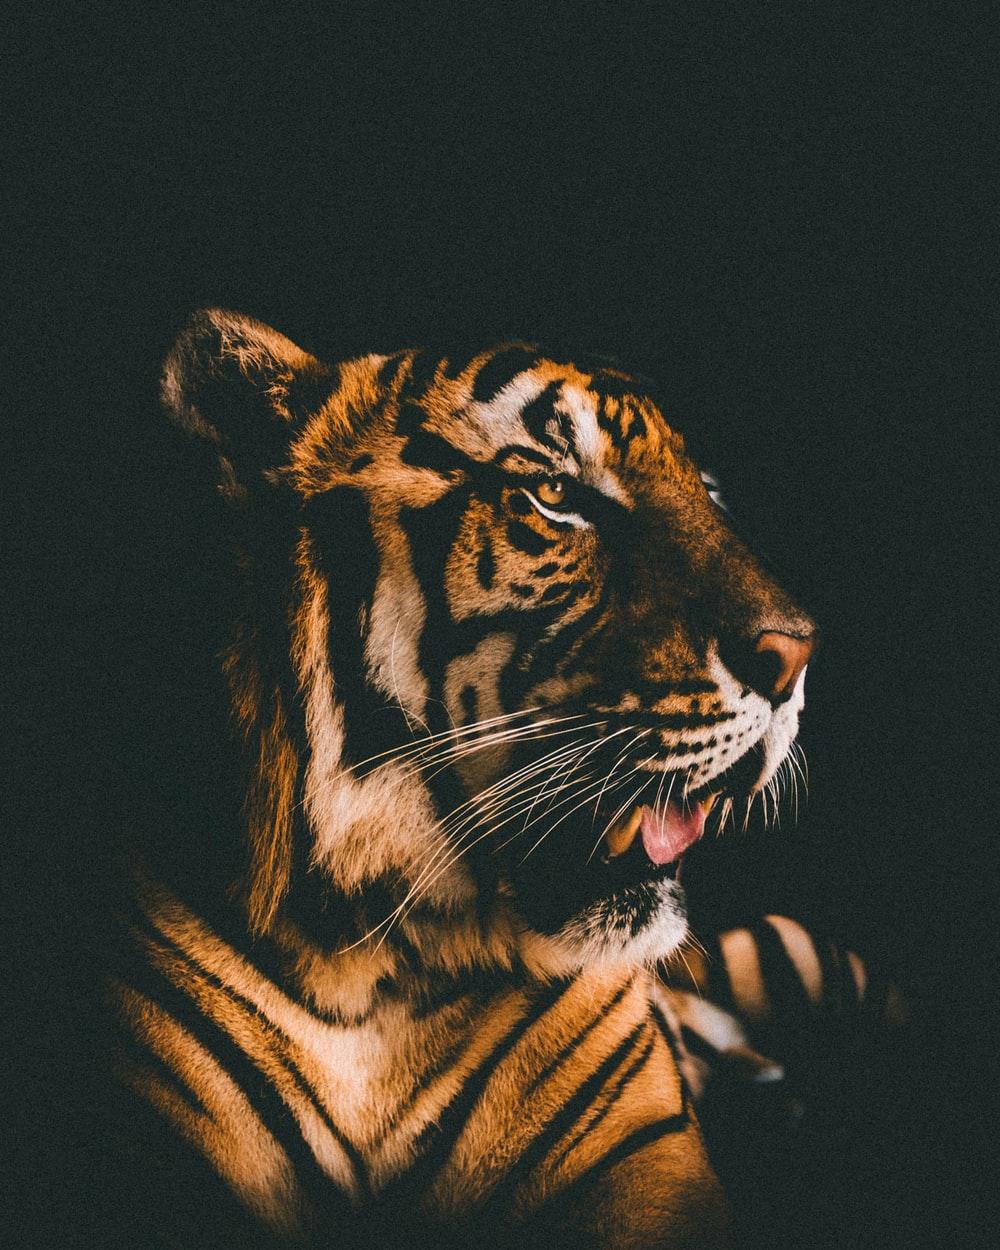 Tiger Picture. Download Free Image